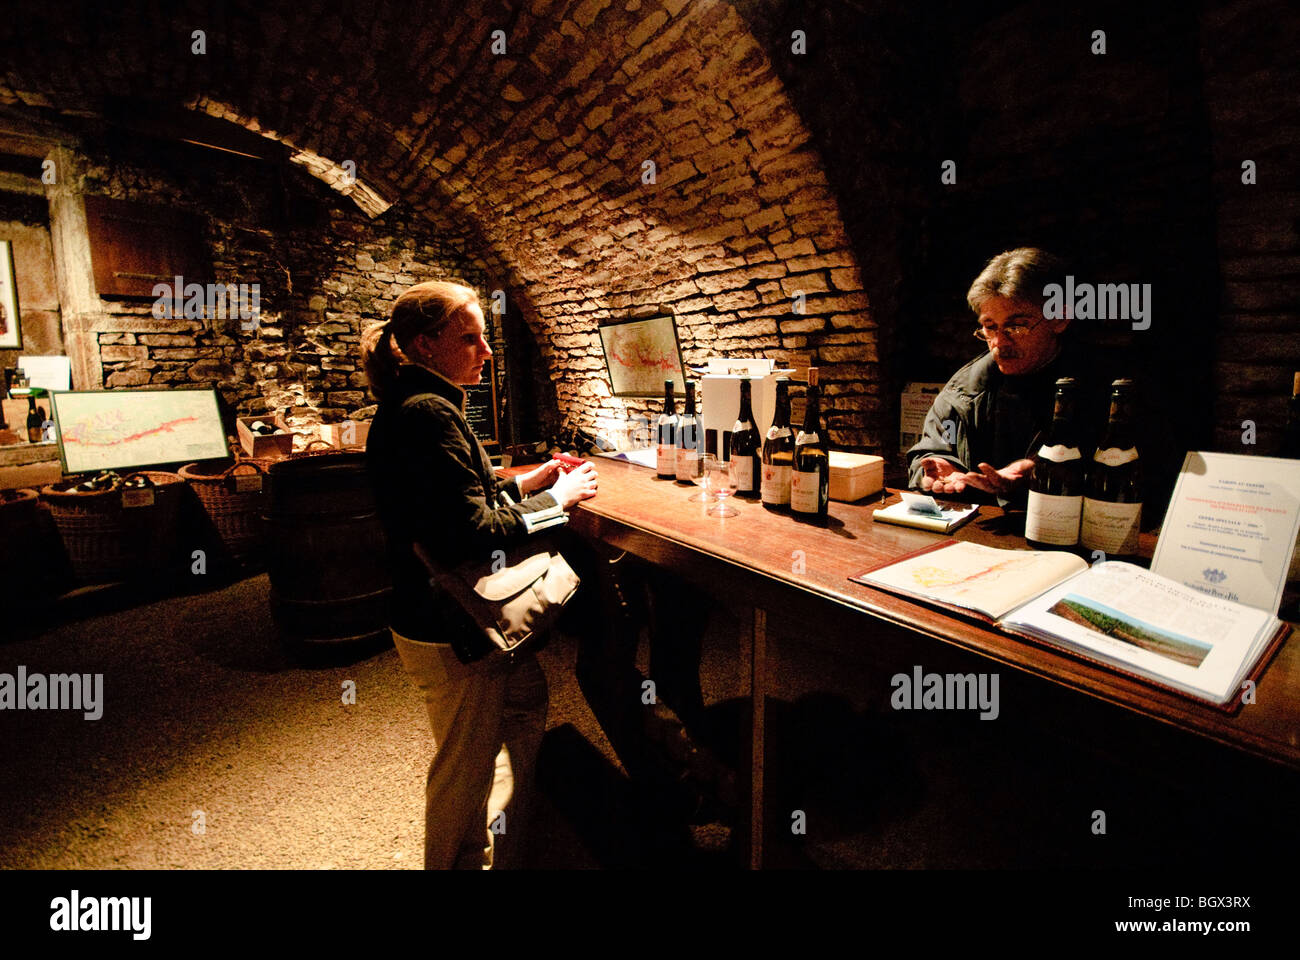 Woman buying wine in the cave of Dufouleur Pere et Fils Nuits-St-Georges, Bourgogne (Burgundy). NB: this image includes image noise. Stock Photo